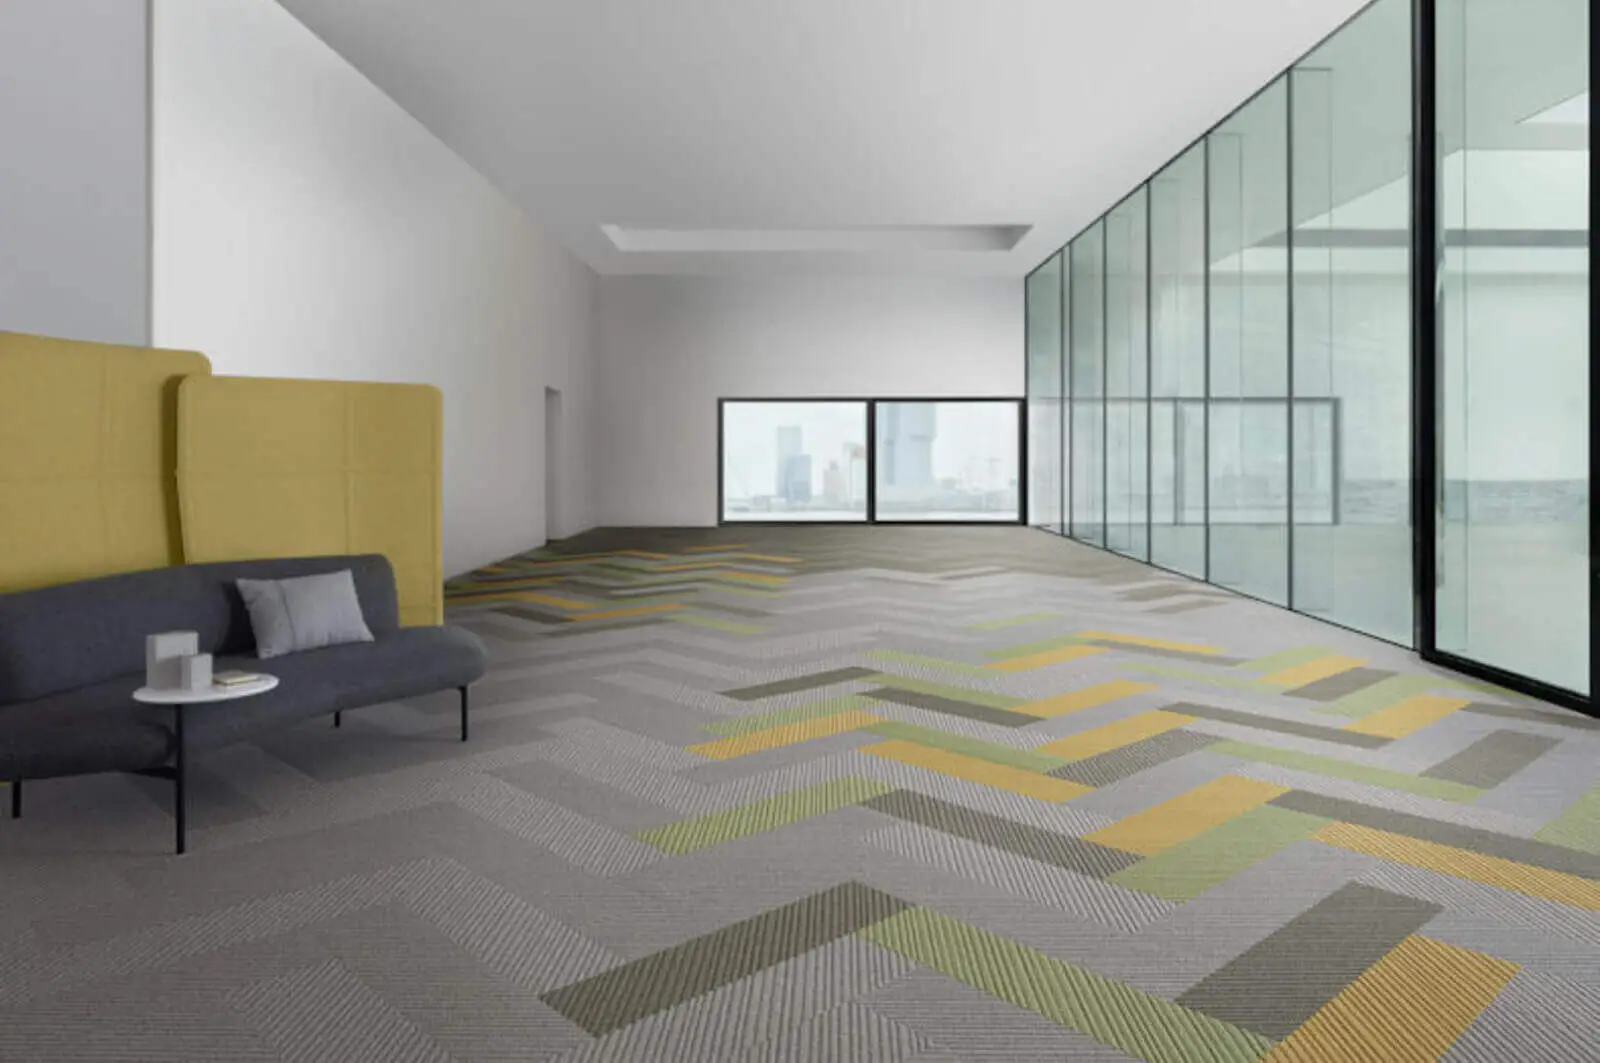 Office space with Carpet Tile Flooring 8